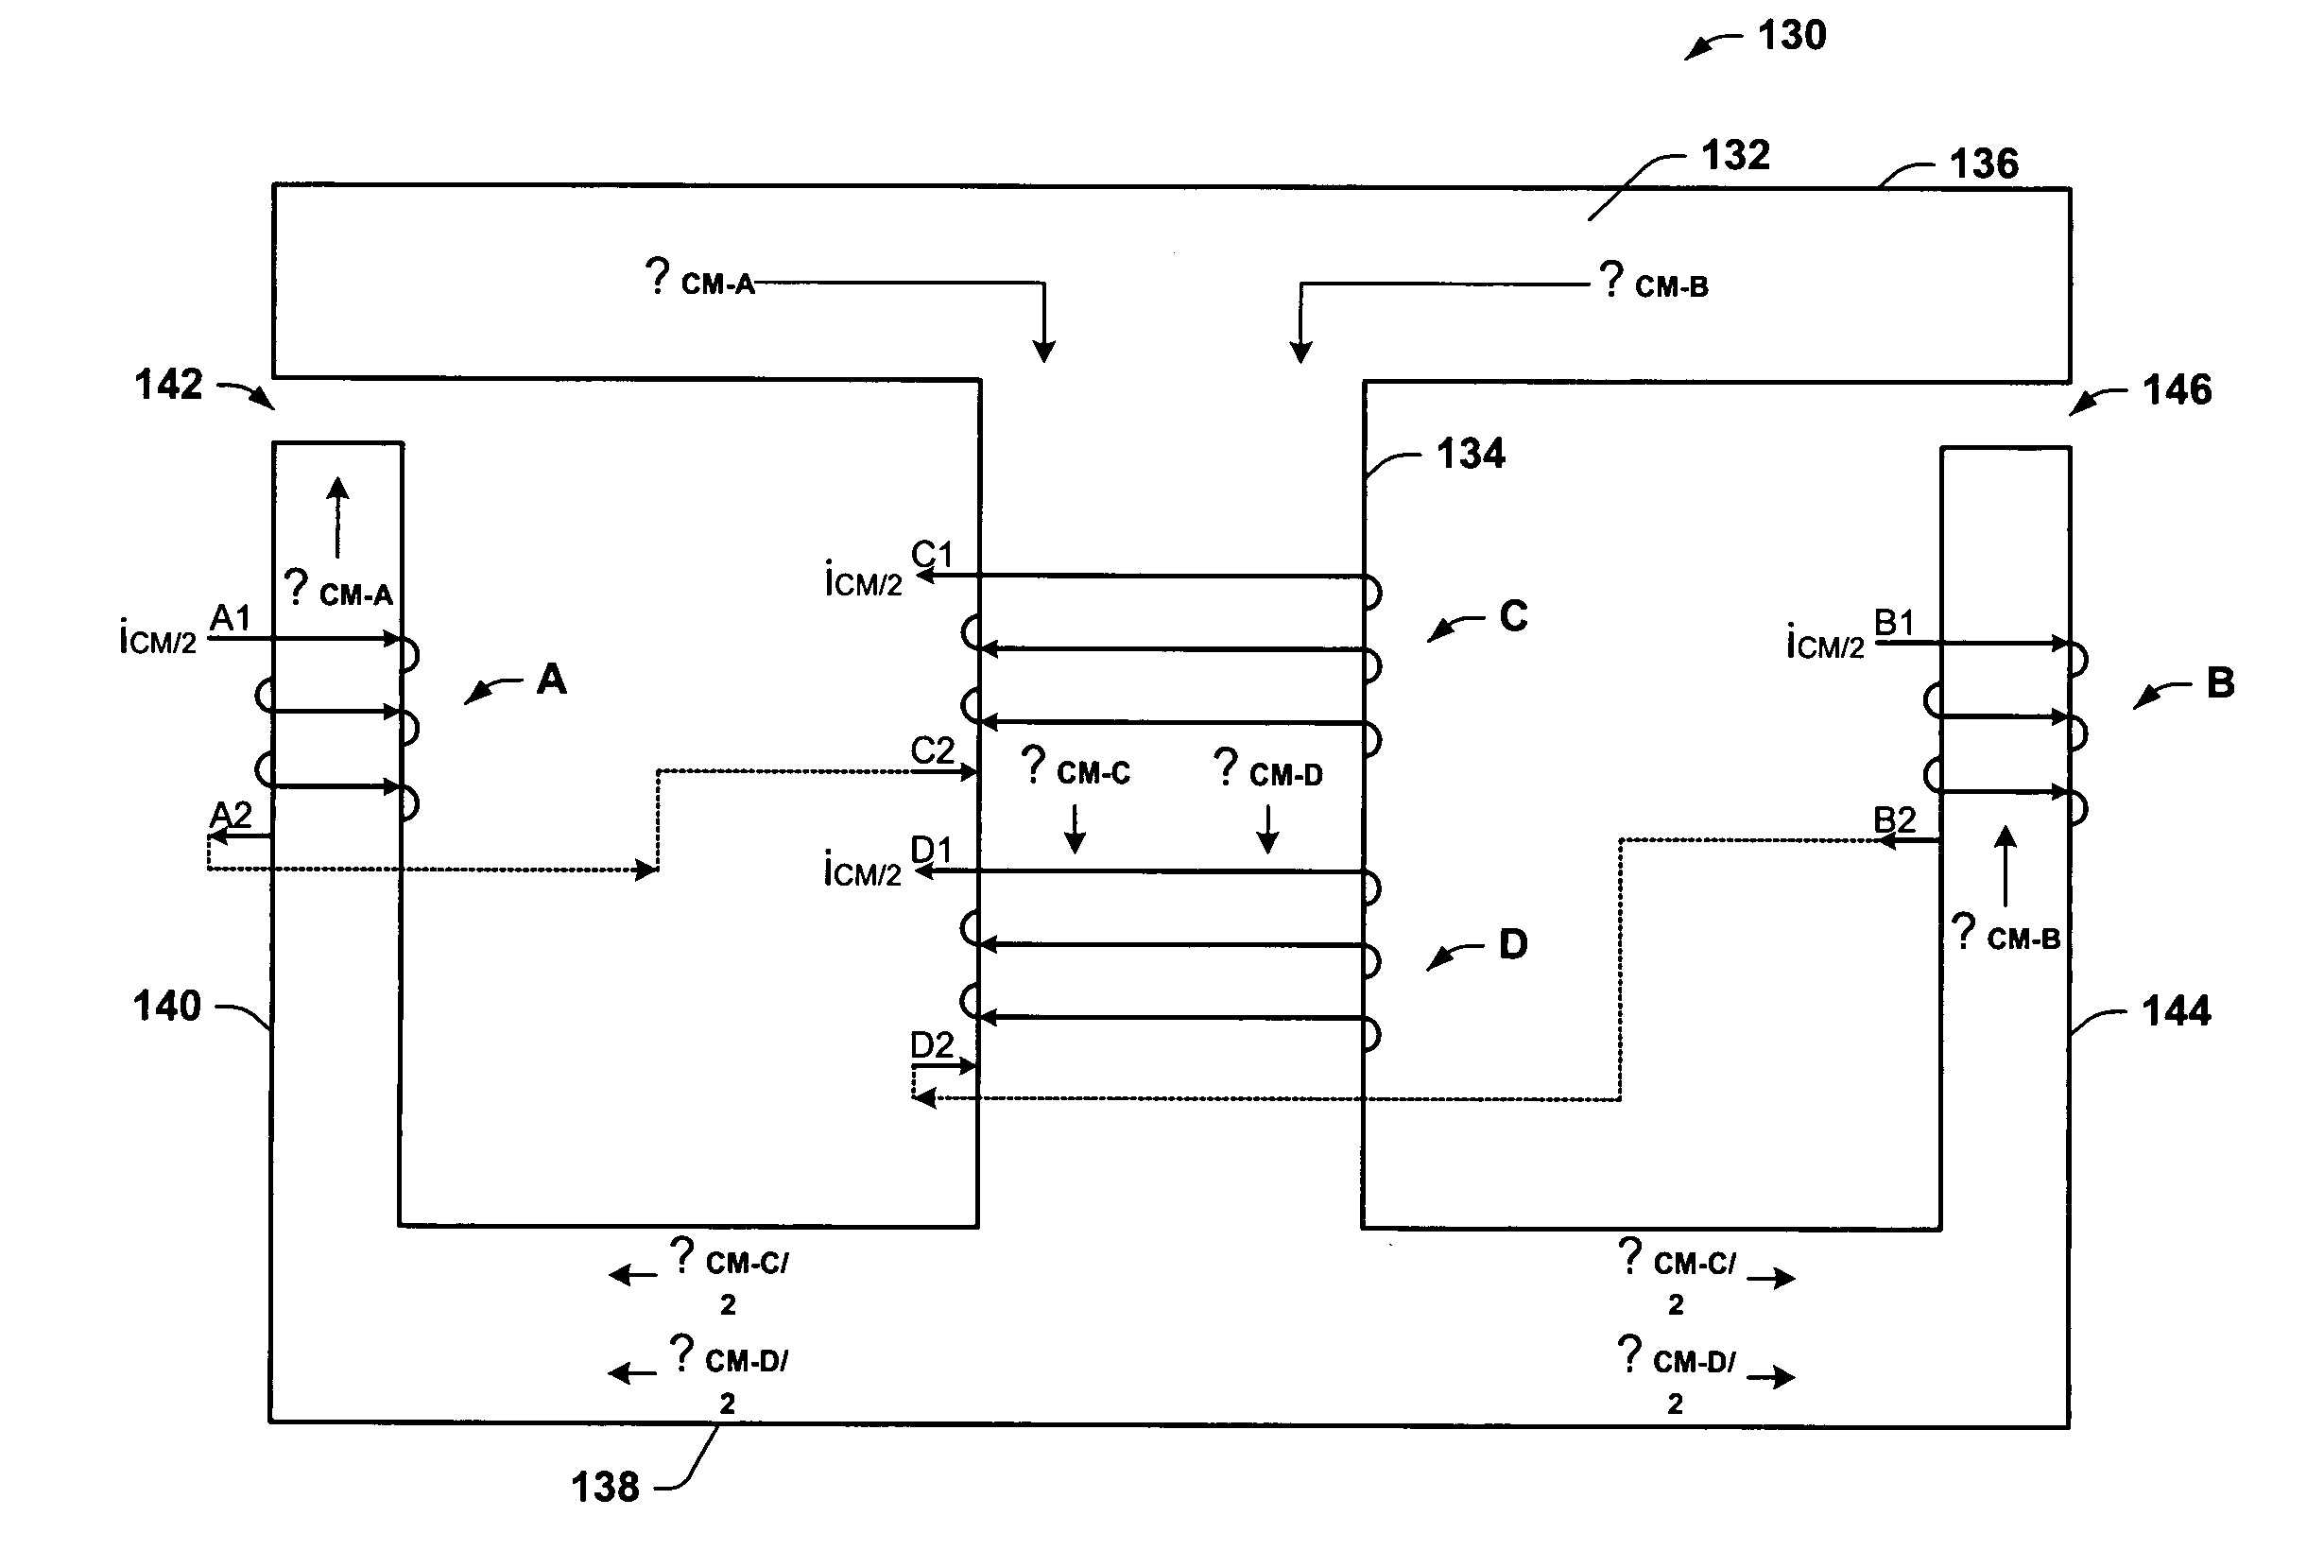 Integrated DC link choke and method for suppressing common-mode voltage in a motor drive